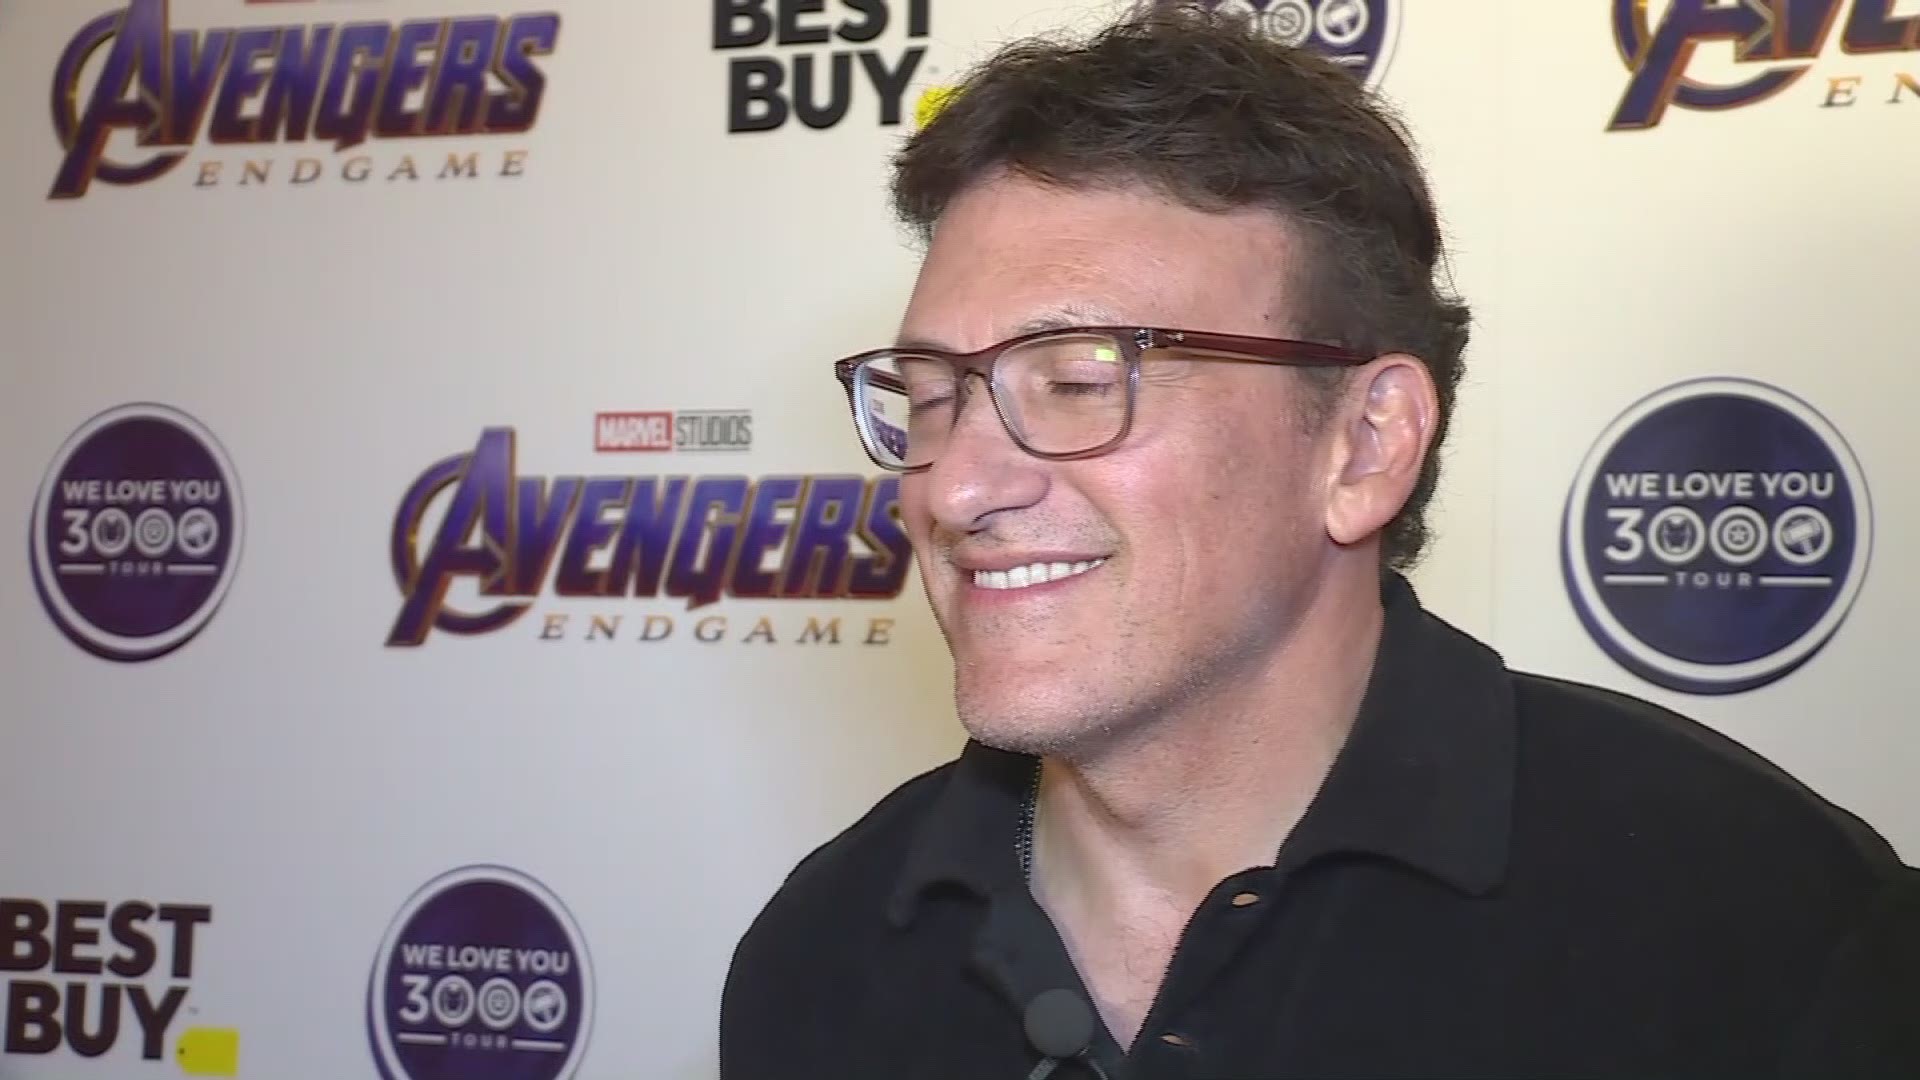 Cleveland native and Avengers: Endgame co-director Anthony Russo was back home for the 'We Love You 3000' tour at Best Buy on Brookpark Road.